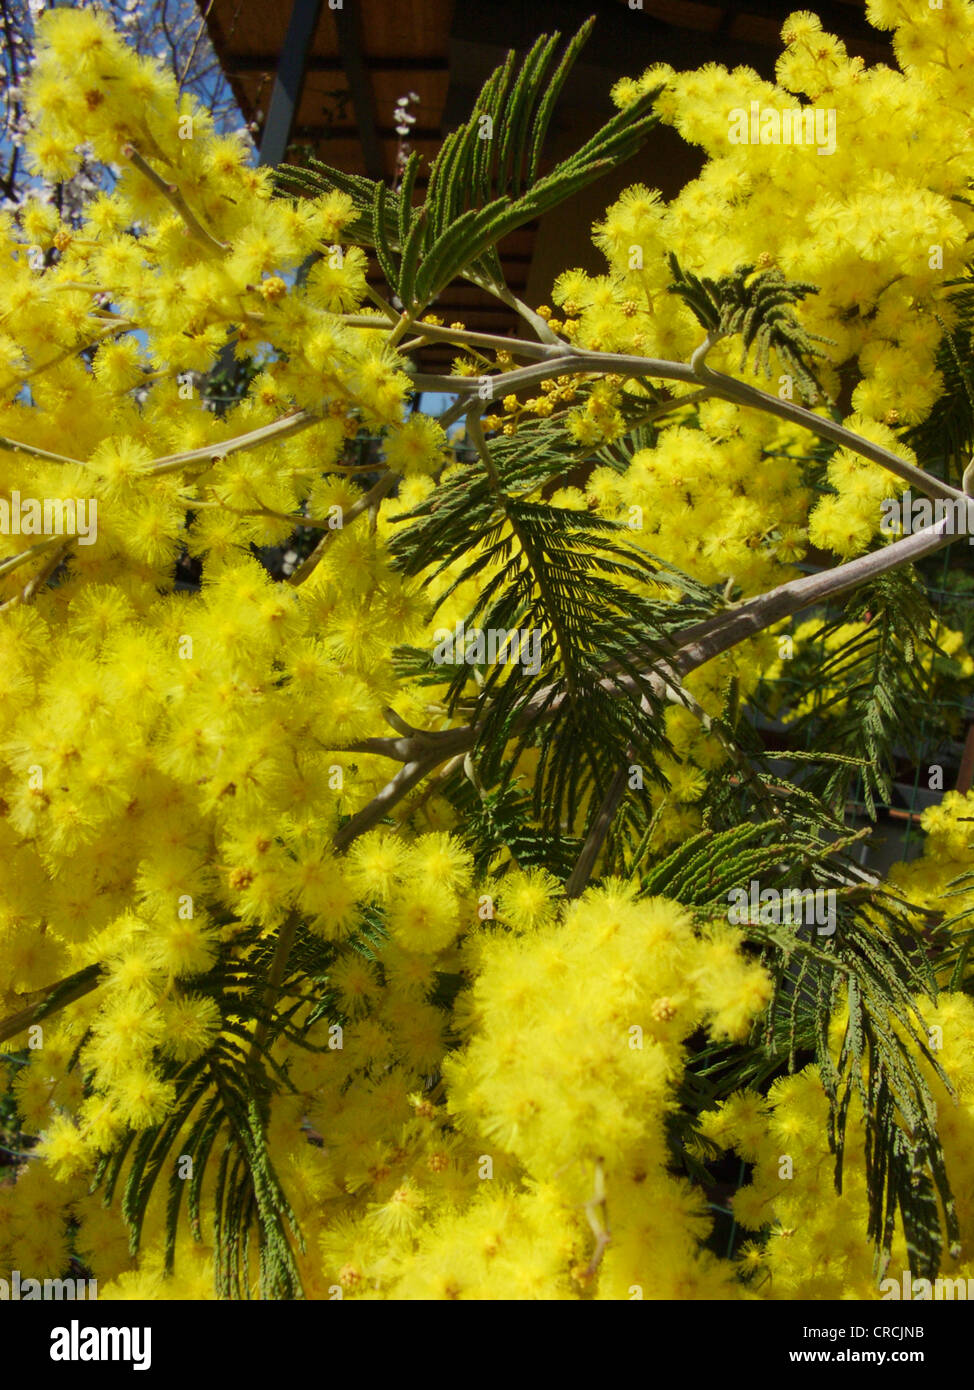 silver wattle (Acacia dealbata), twig with blossoms Stock Photo